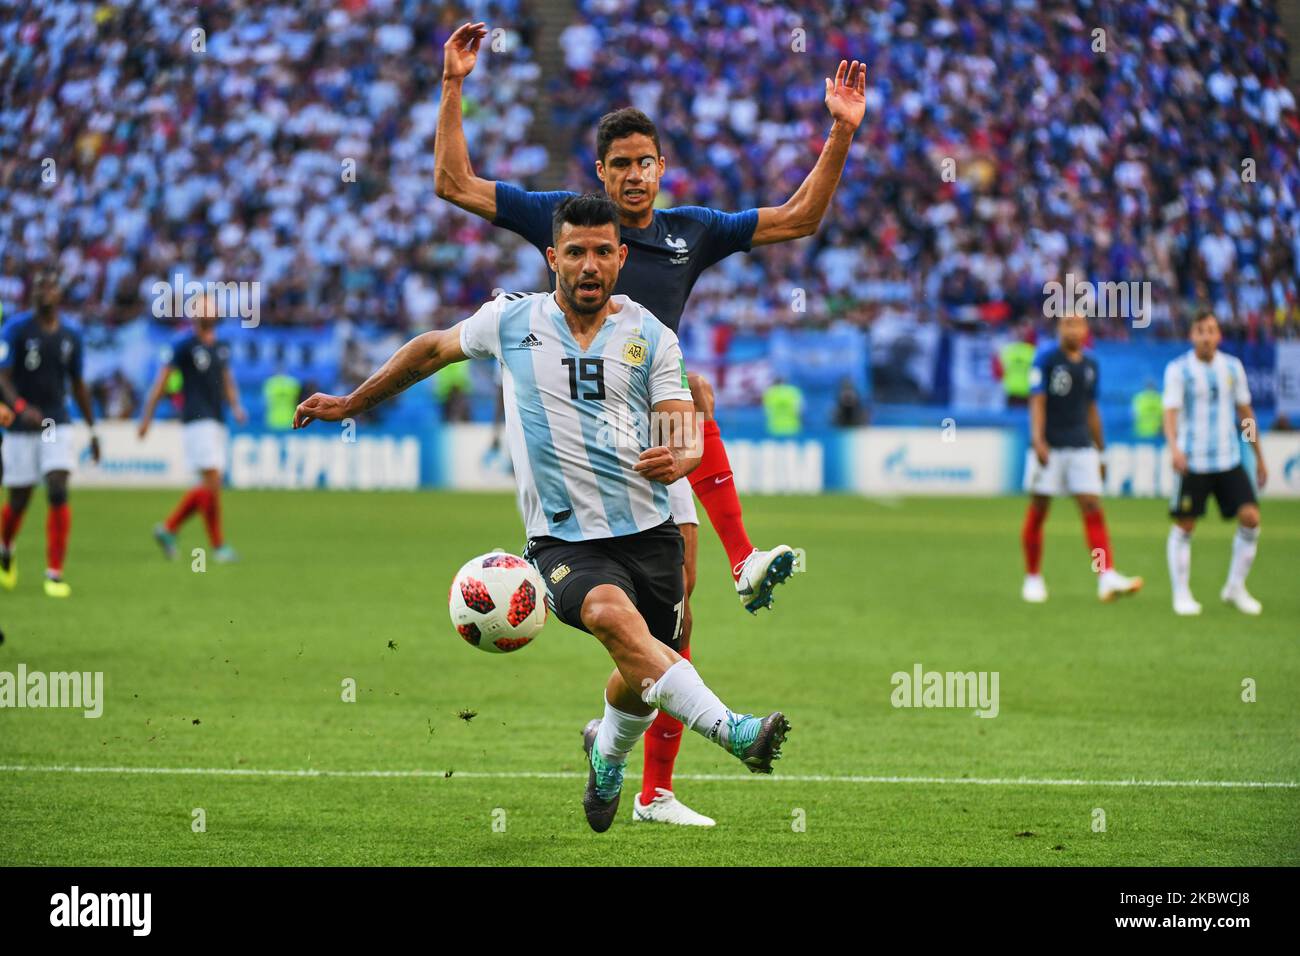 Raphael Varane of France and Sergio Aguero of Argentina fighting for the ball during the FIFA World Cup match France versus Argentina at Kazan Arena, Kazan, Russia on June 30, 2018. (Photo by Ulrik Pedersen/NurPhoto) Stock Photo